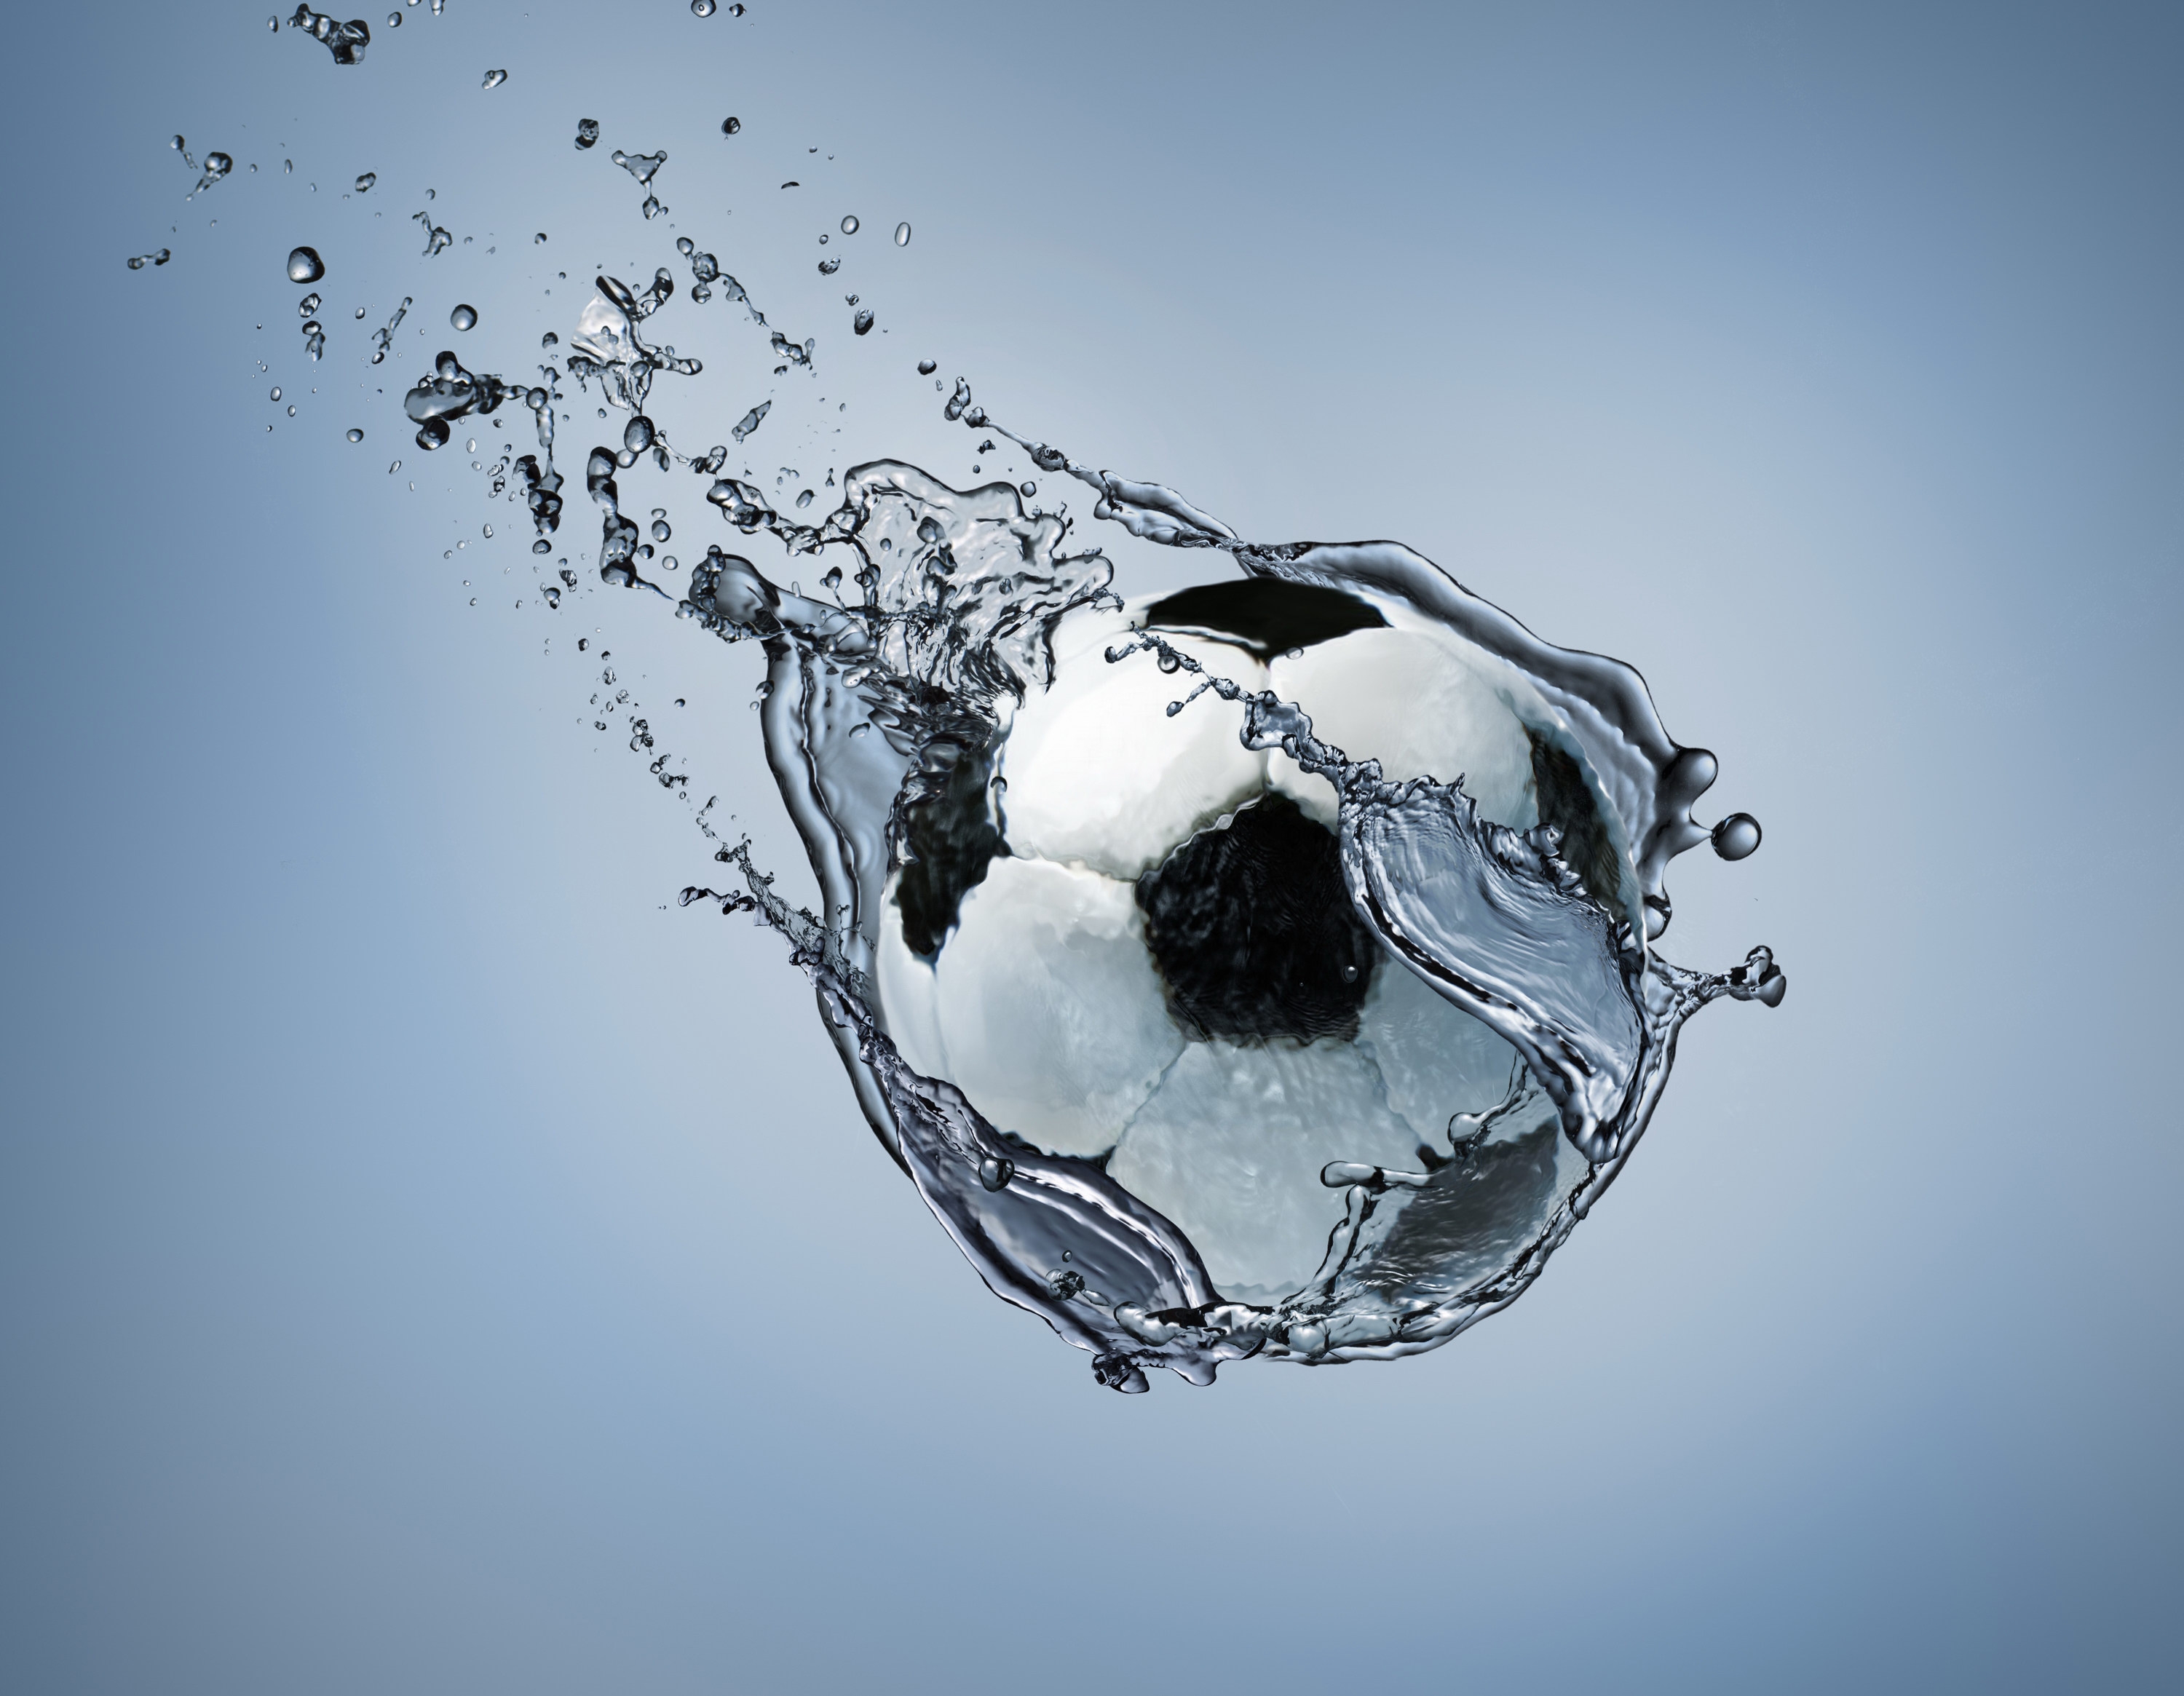 79742 download wallpaper sports, abstract, water, football, traffic, movement, ball screensavers and pictures for free